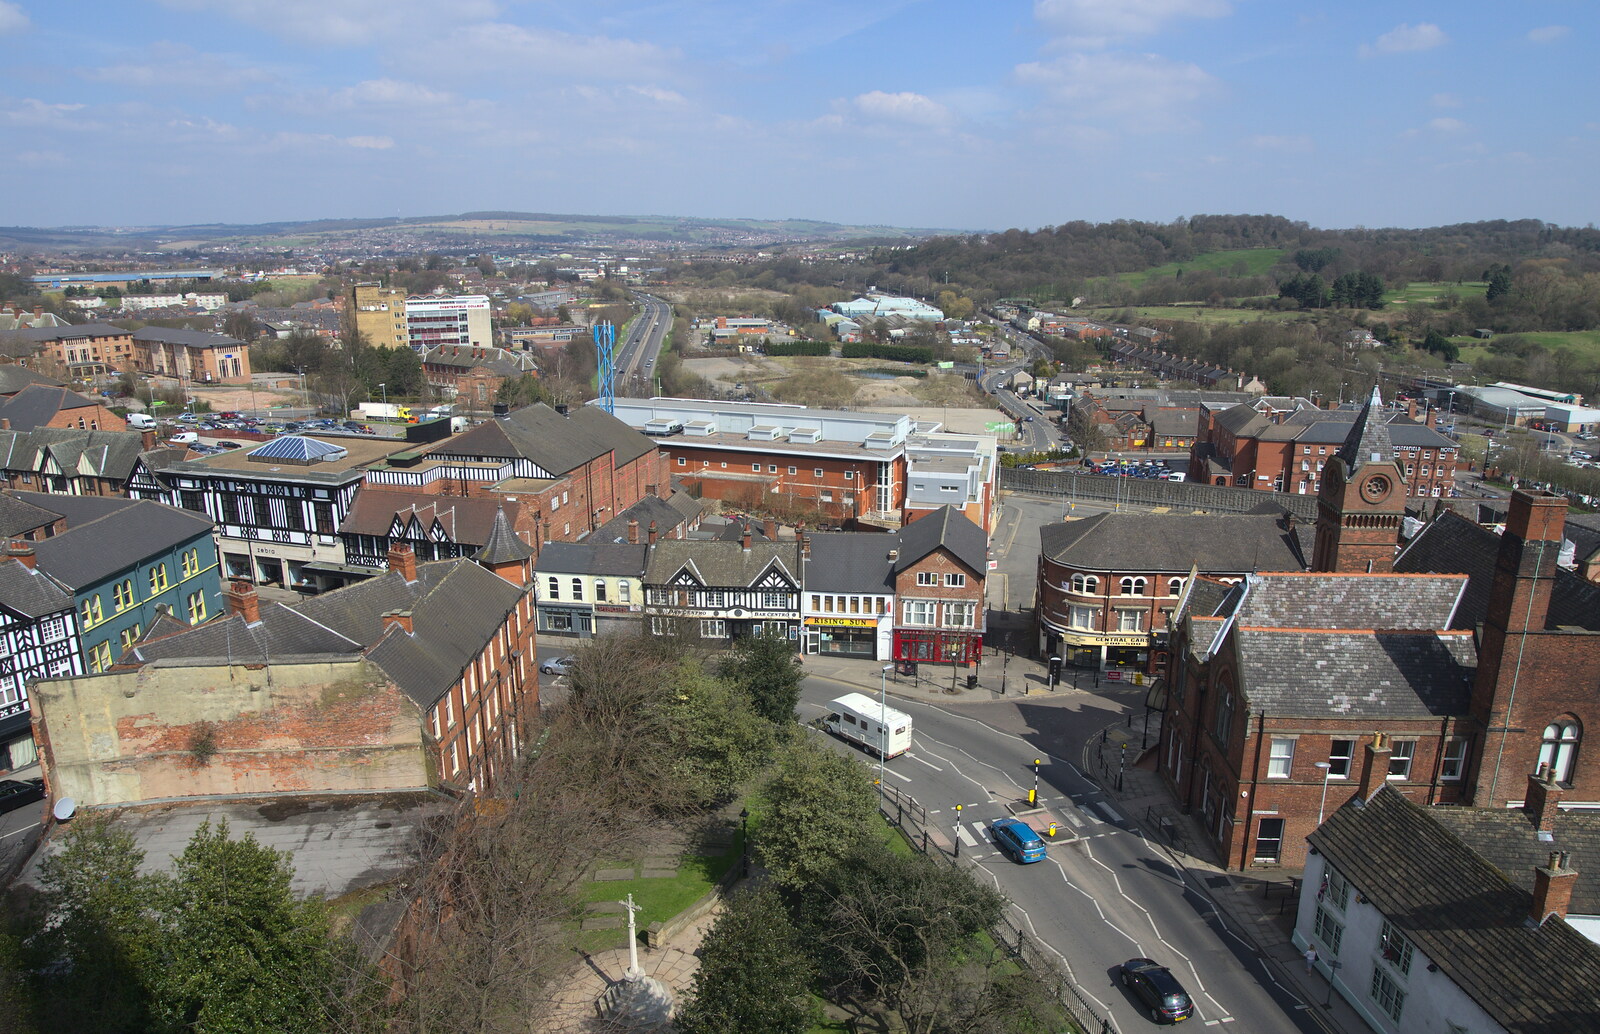 Chesterfield, looking towards Rotherham from Chesterfield and the Twisty Spire, Derbyshire - 19th April 2013